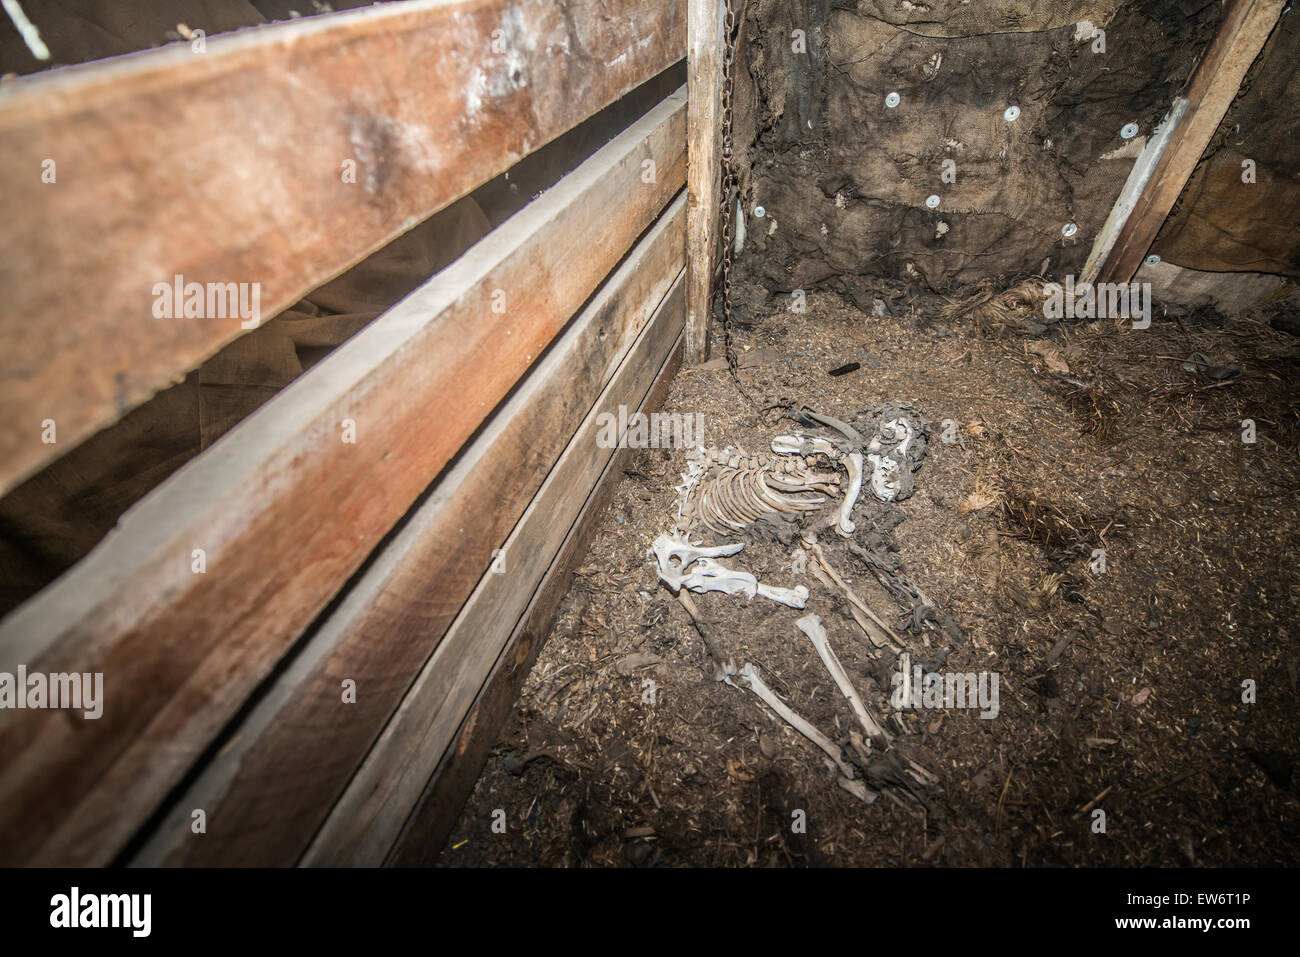 Inside Hut High Resolution Stock Photography and Images - Alamy